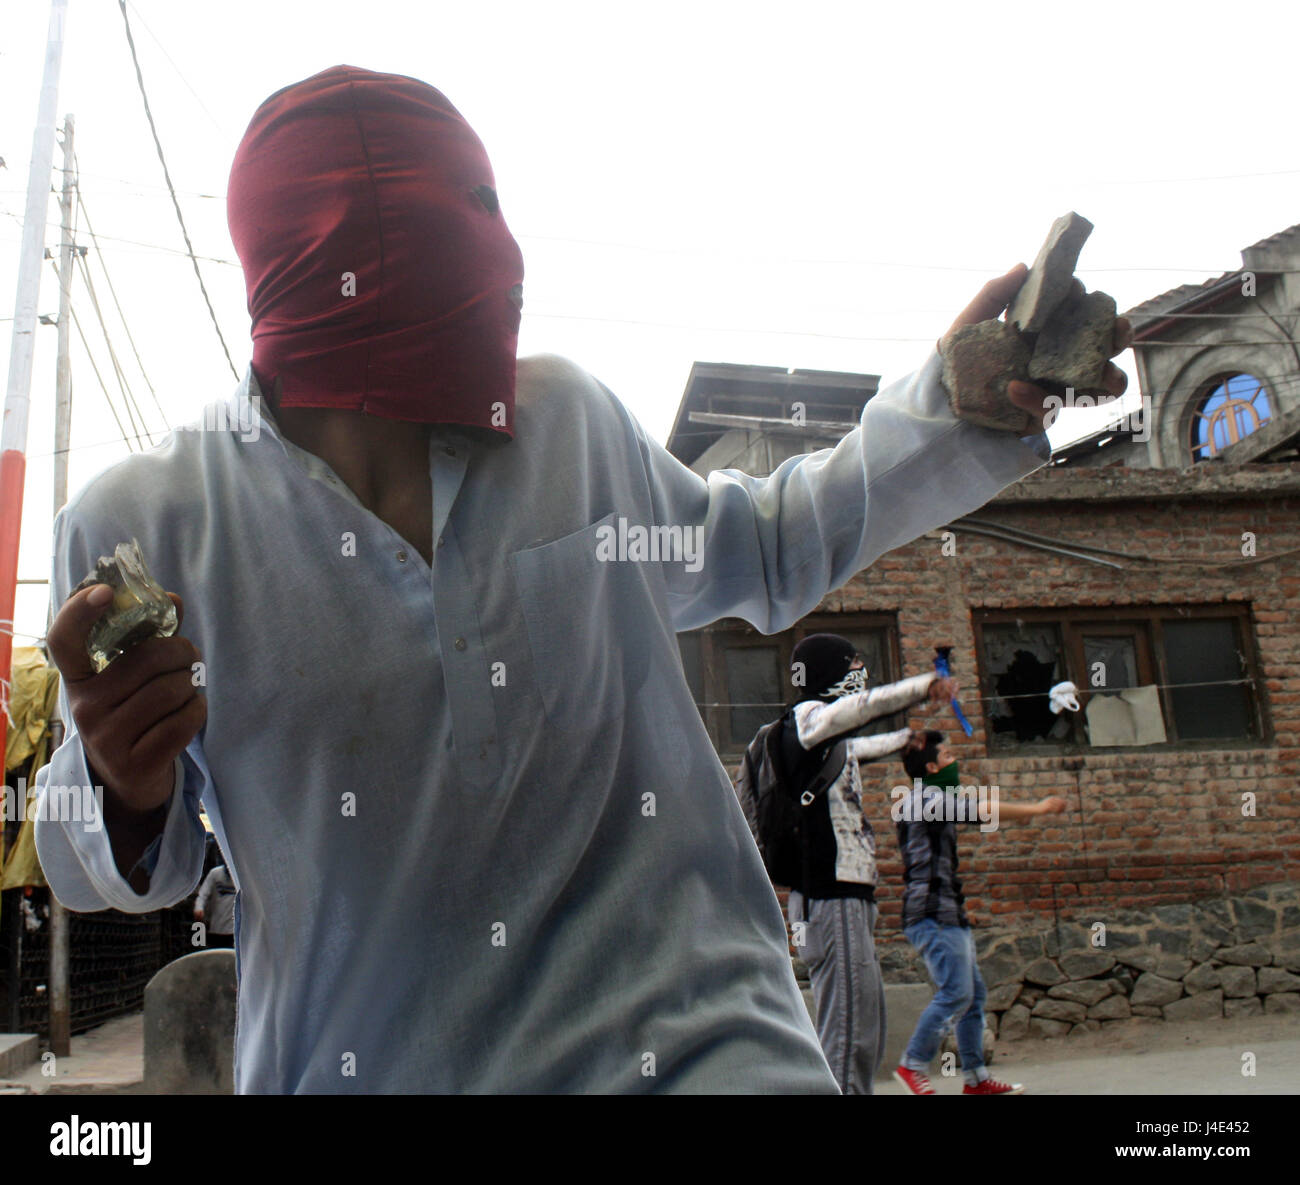 Srinagar, Kashmir. 12th May, 2017. .A Kashmiri protester throw bricks. Clashes broke out between protesters and security forces in downtown Nowhatta area of Srinagar. Groups of youth indulged in sloganeering and stone- pelting at Indian security forces soon after Friday congregational prayers. According to the report, 102 unarmed civilians were killed in 135 days of unrest that was sparked by the killing on July 8 of Hizbul Mujahideen commander Burhan Wani by the armed forces. Credit: sofi suhail/Alamy Live News Stock Photo